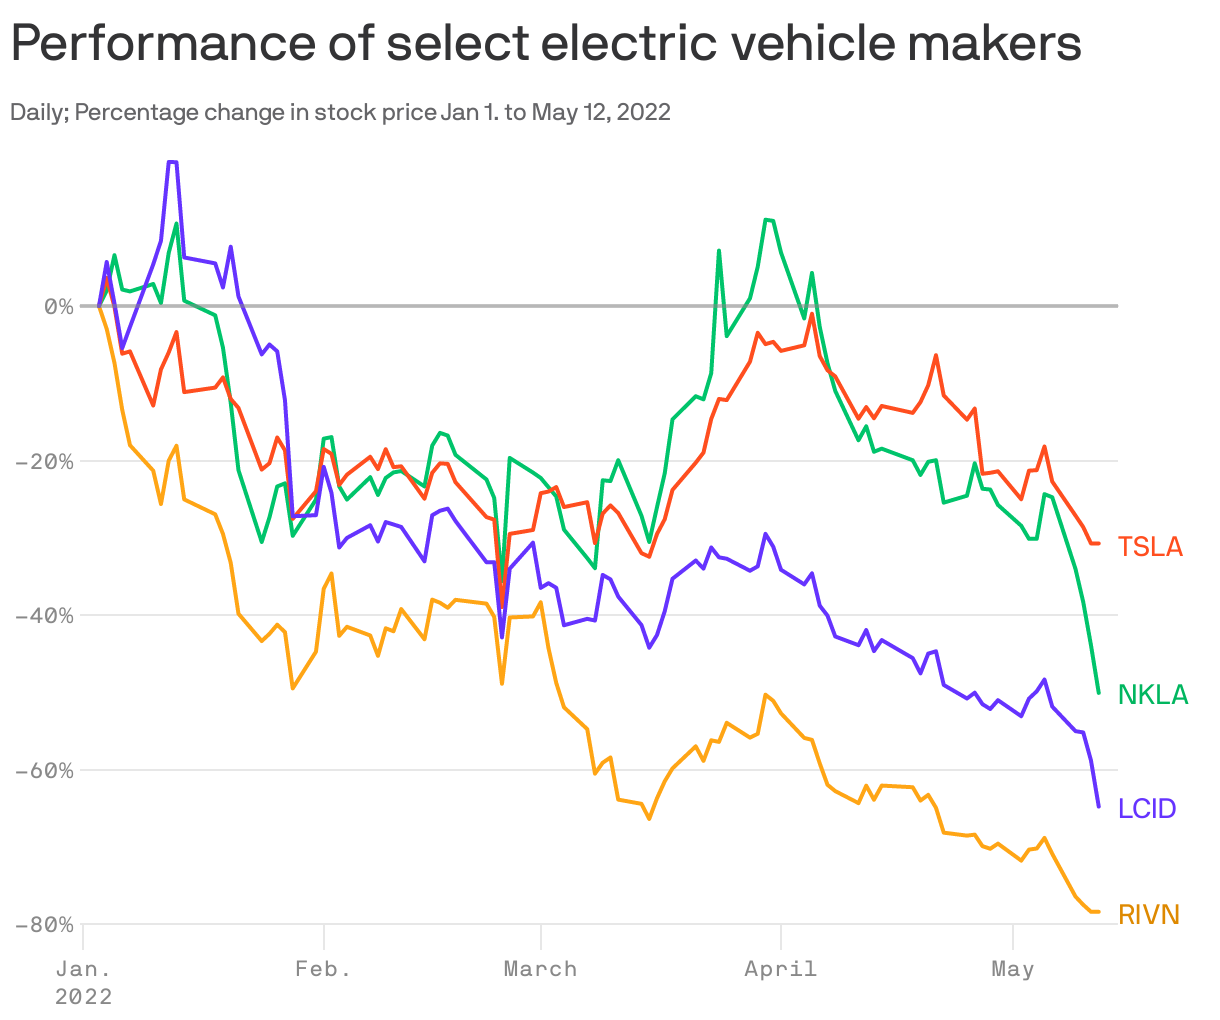 Performance of select electric vehicle makers